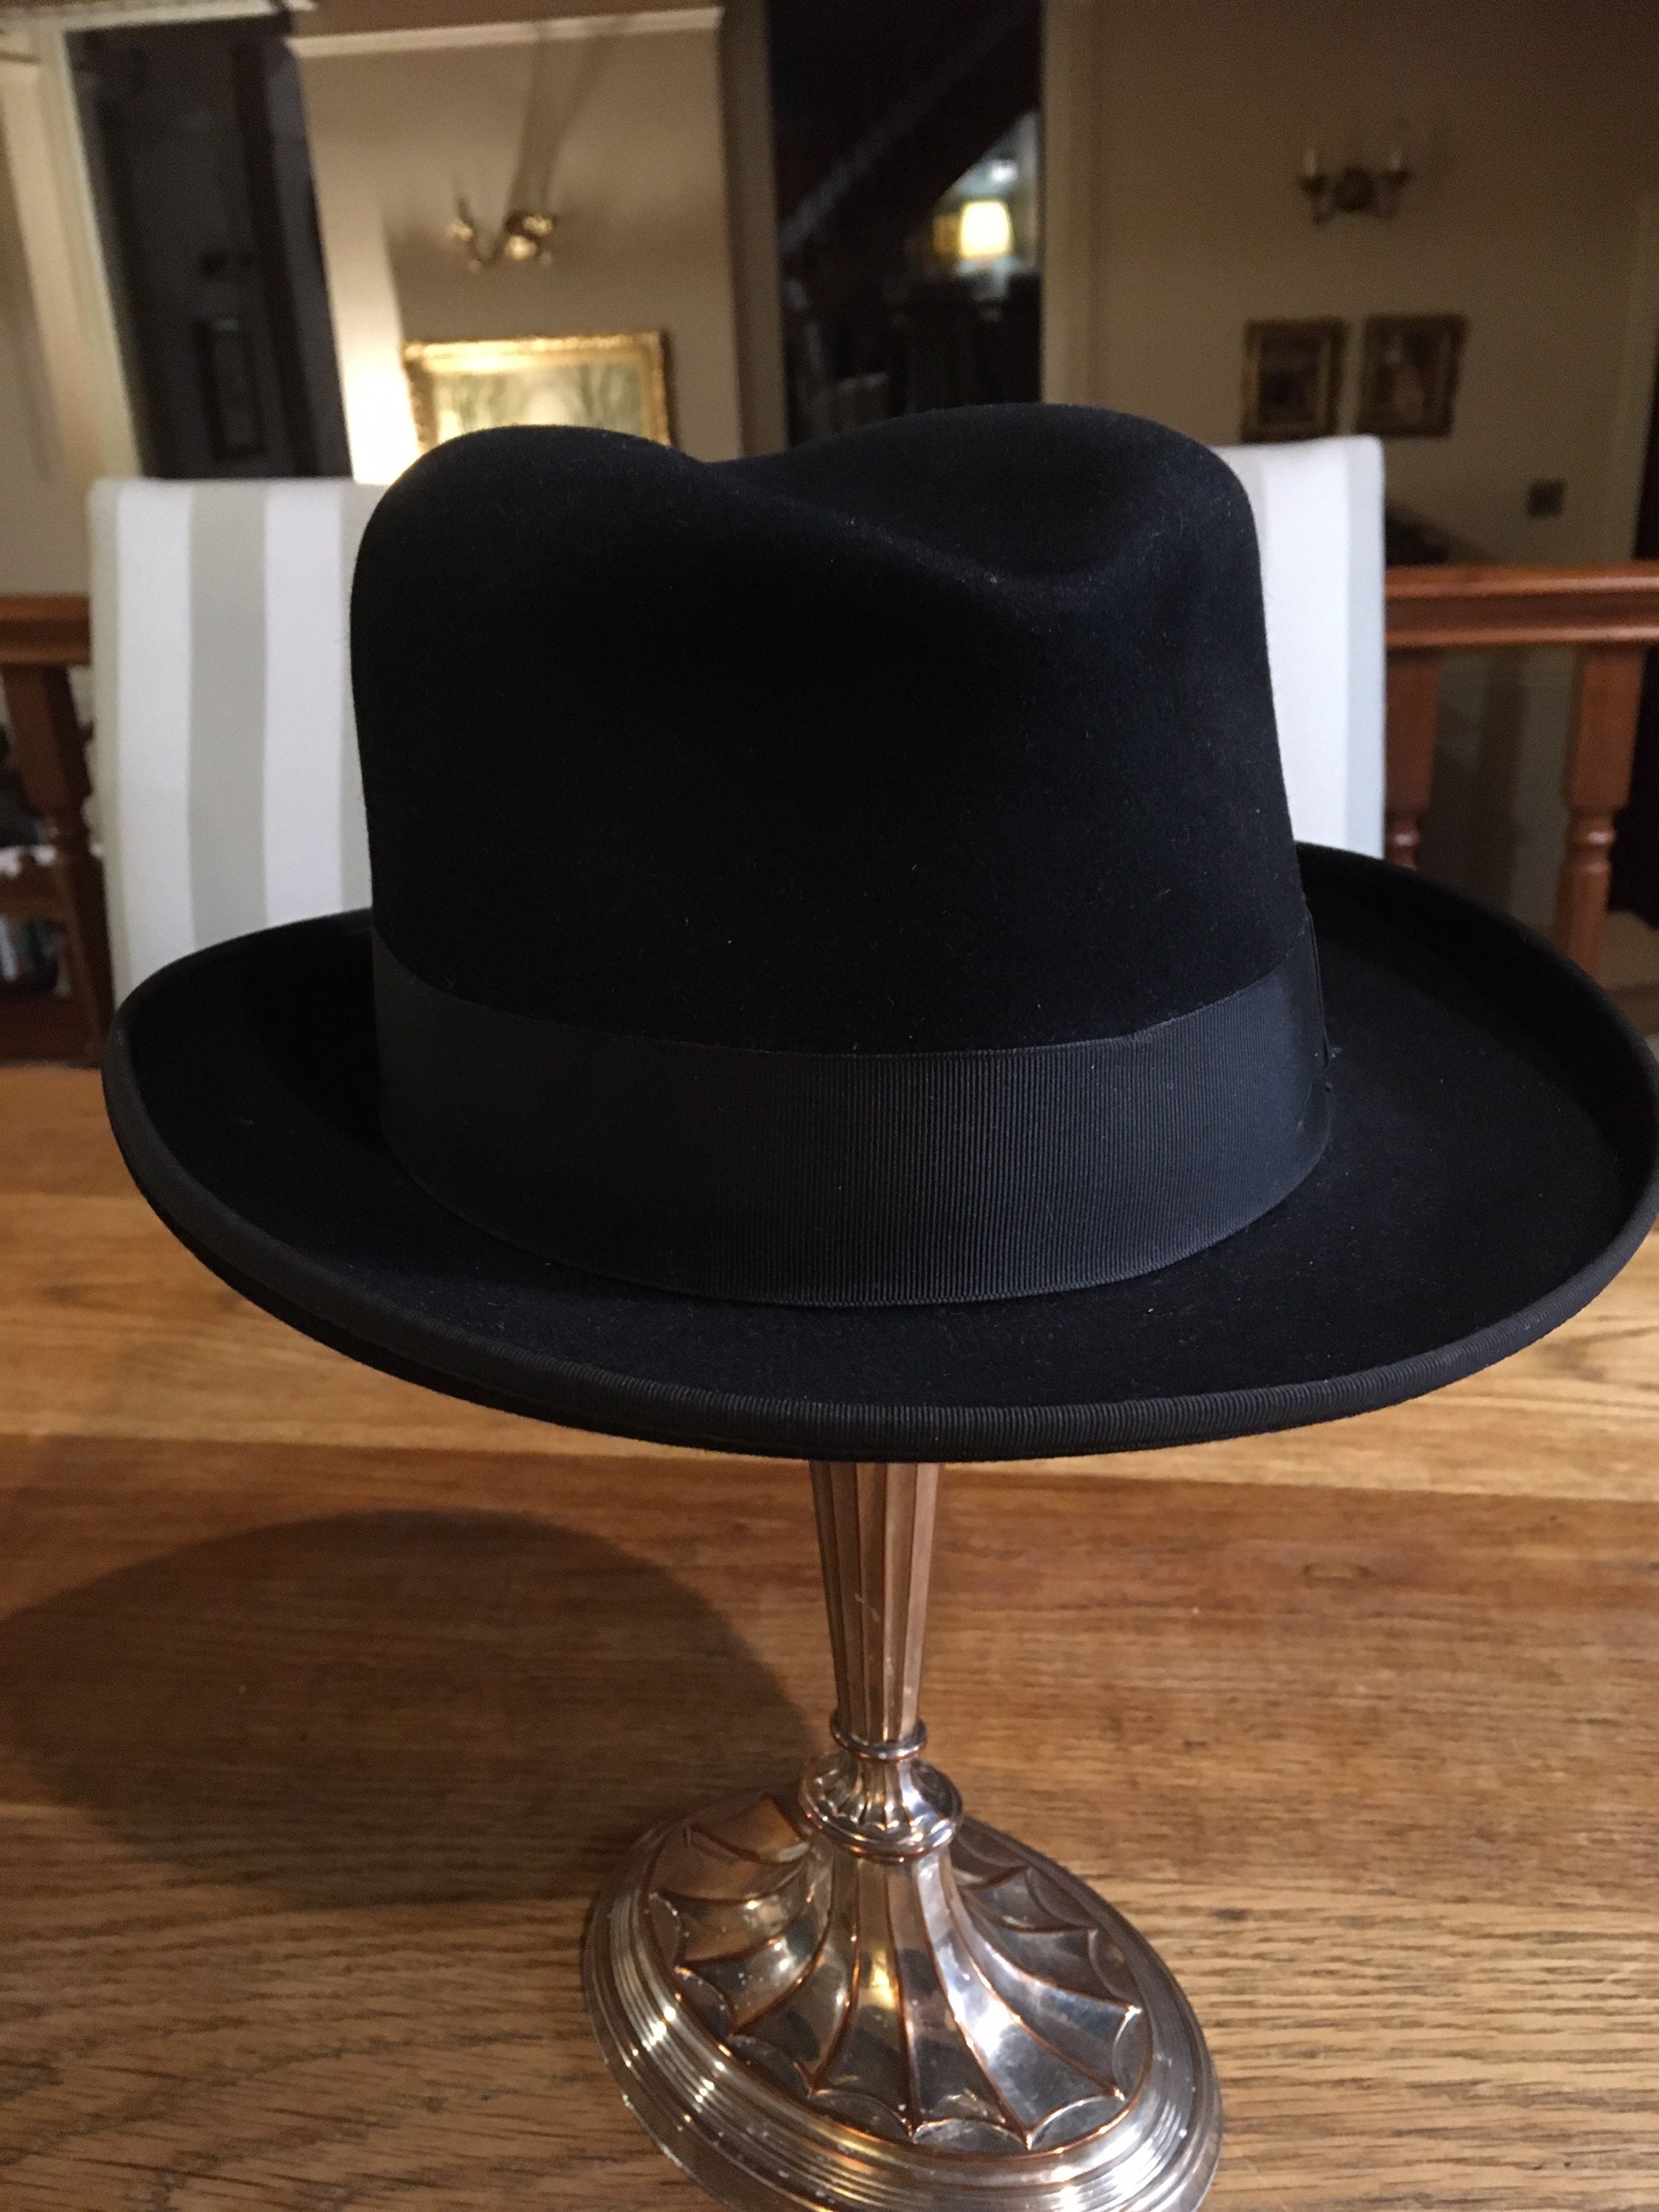 Vintage Homburg Hat by Dunn &co Piccadilly Circus London - Etsy